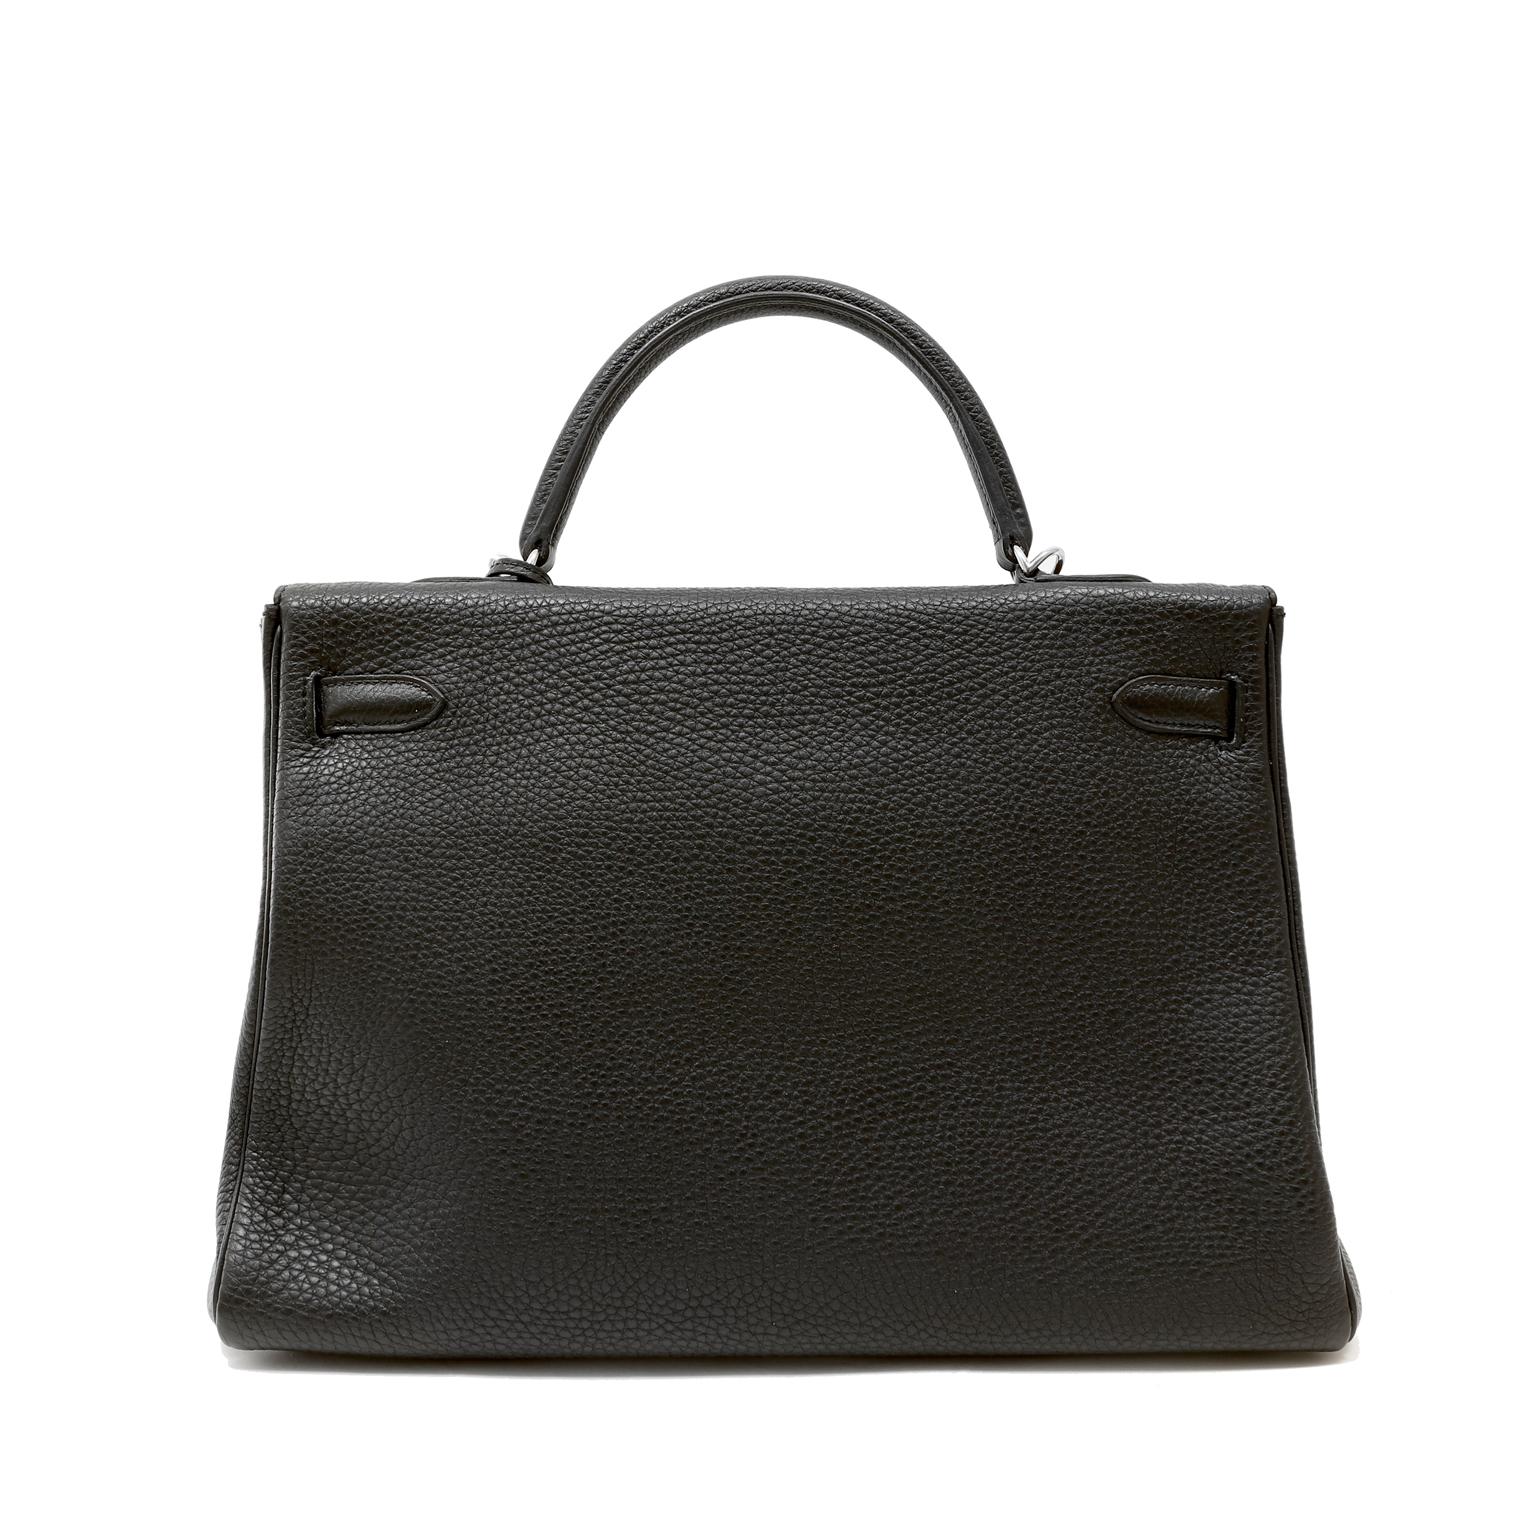 This authentic Hermès Black Togo 35 cm Kelly is in pristine condition with the protective plastic intact on much of the hardware.  The handstitched ladylike Kelly is in extremely high demand and black Togo accented with palladium is a timeless